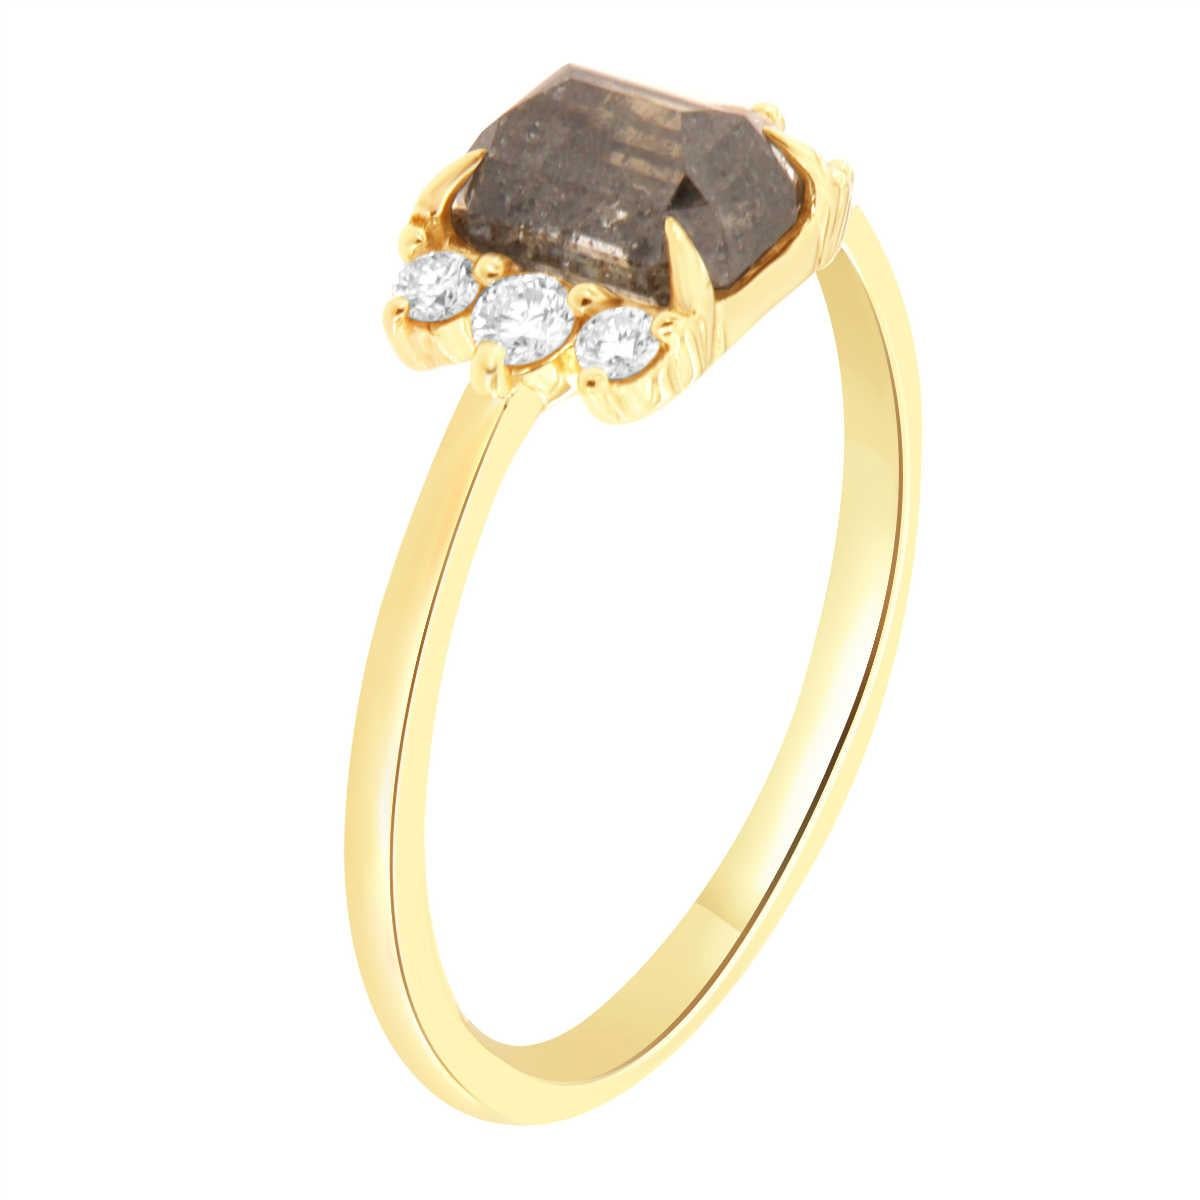 This 14k yellow gold organic & rustic style ring contains approximately six (6) Round diamonds with a total weight of 0.14 Carat. The round diamonds are G in color and SI1 in clarity. In the center of this petite Earthy style ring is set upside down